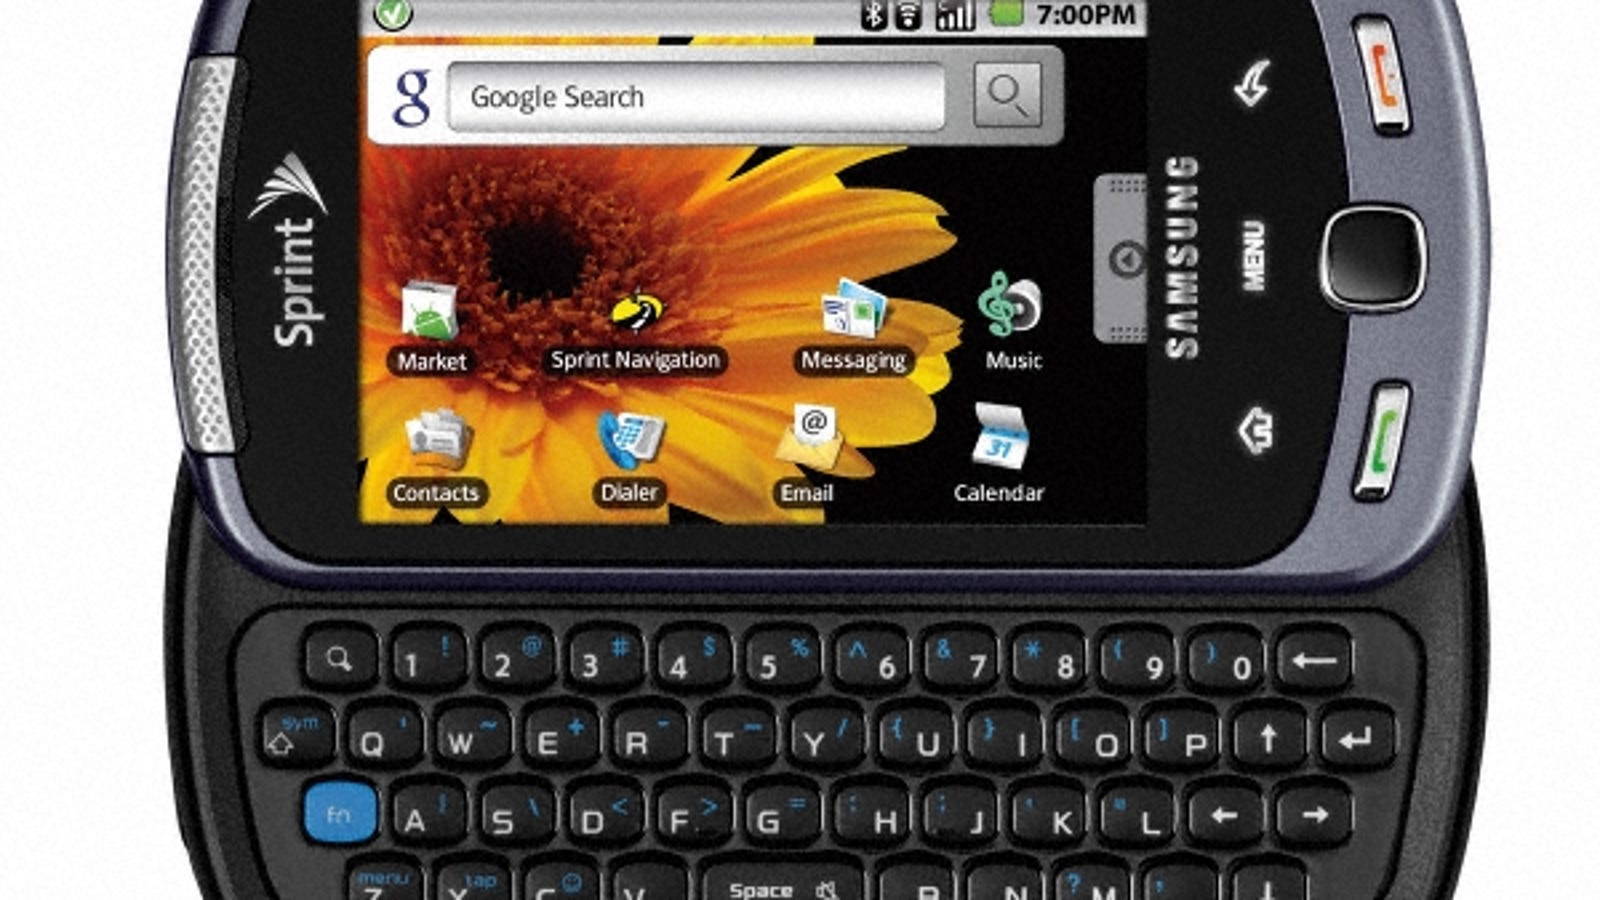 This is "The Moment" For a Samsung Android OLED QWERTY Slider on Sprint